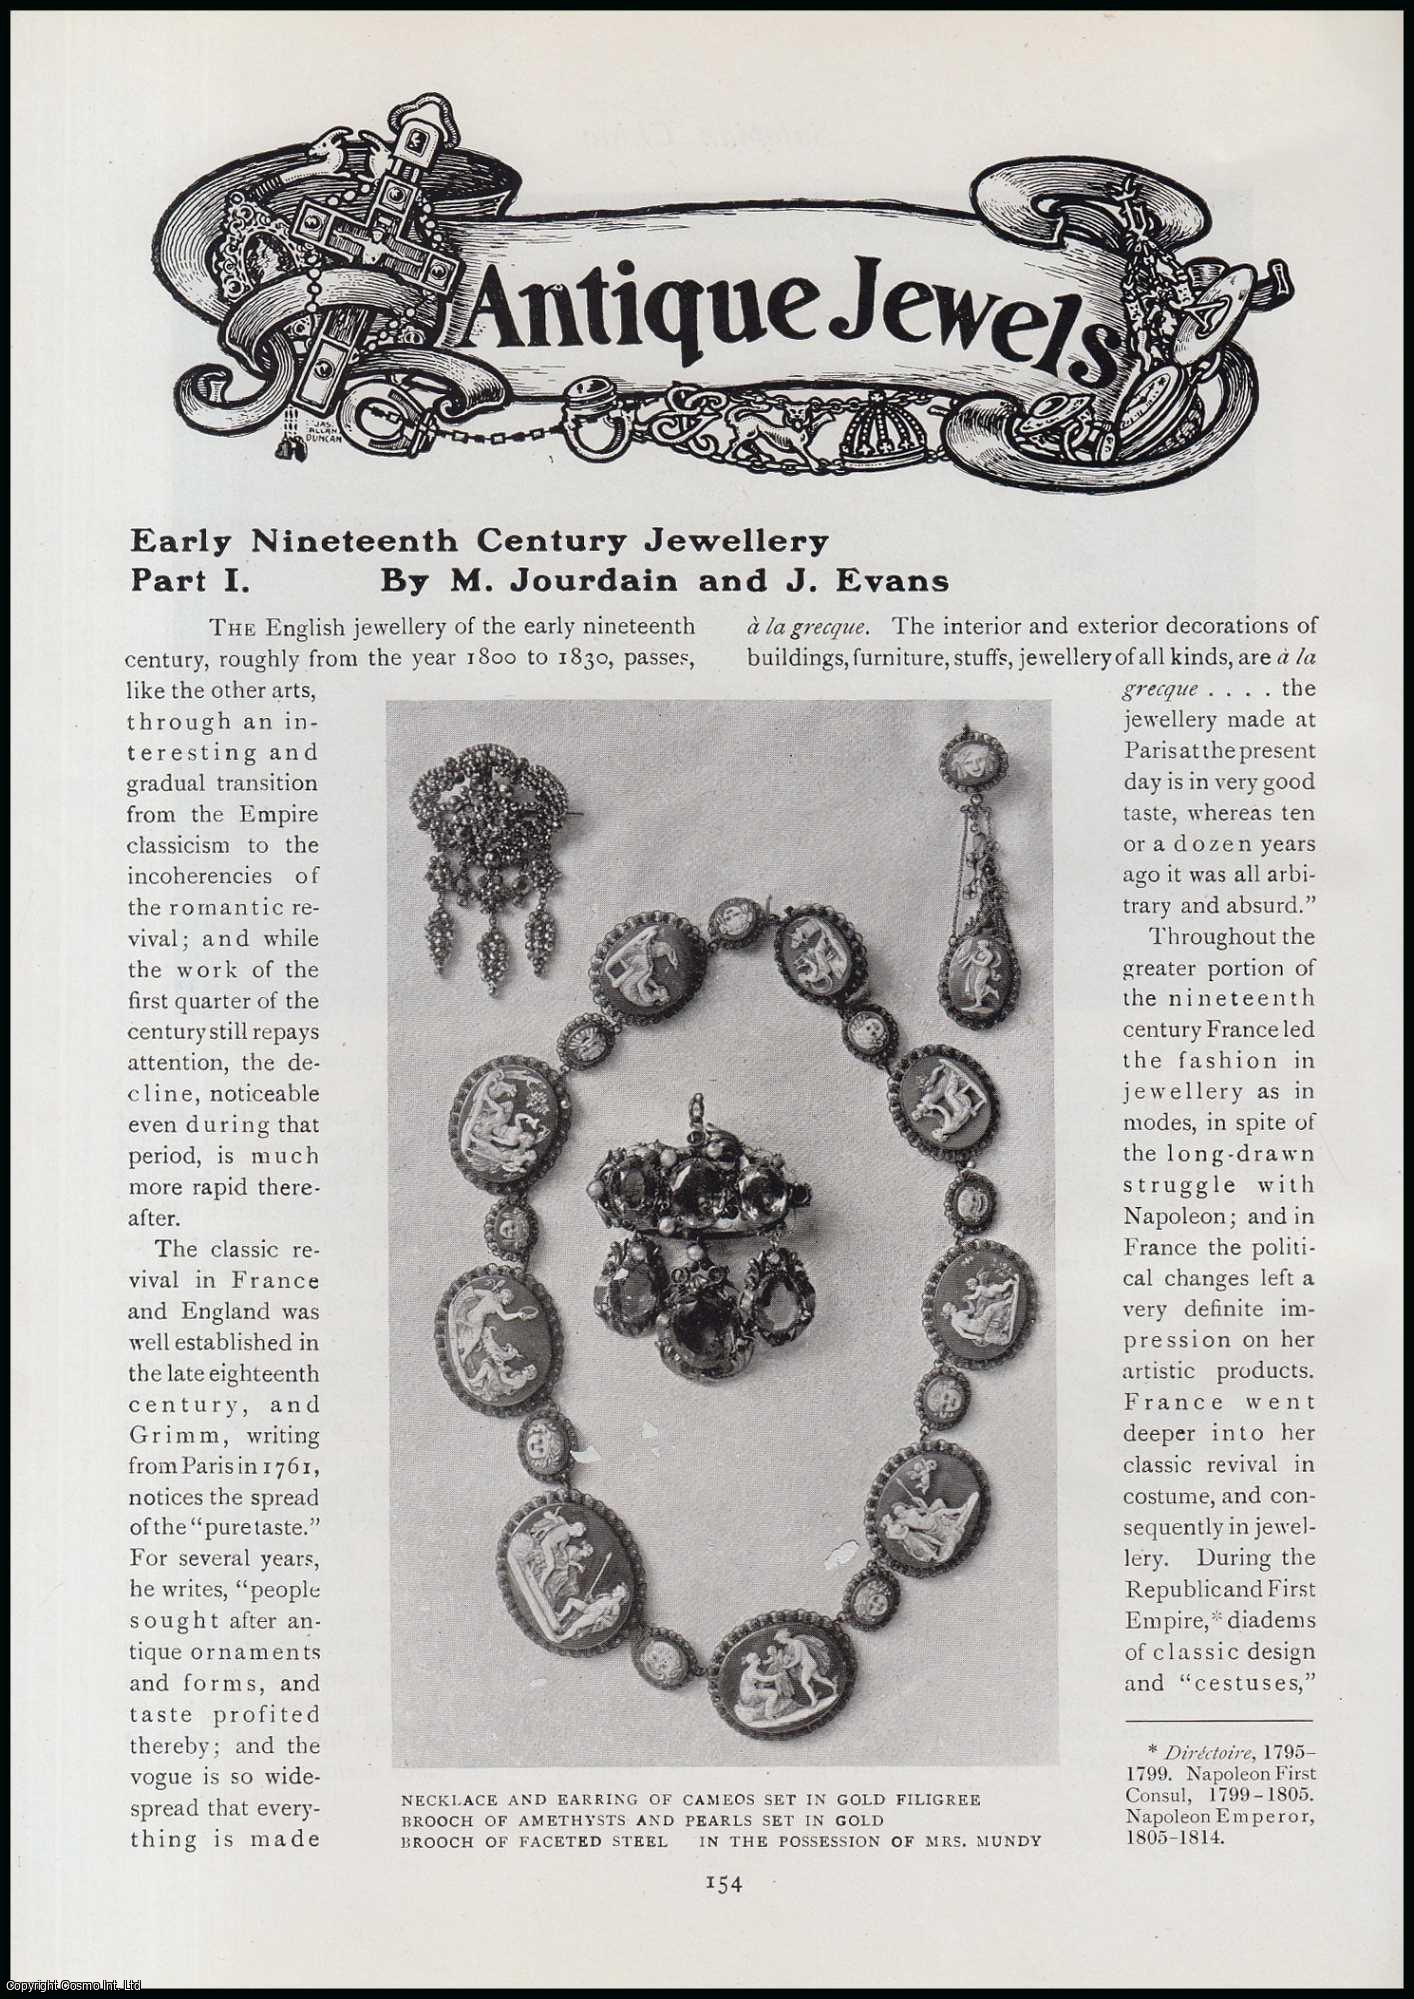 M. Jourdain & J. Evans - Early Nineteenth Century Jewellery (part 1). An original article from The Connoisseur, 1920.